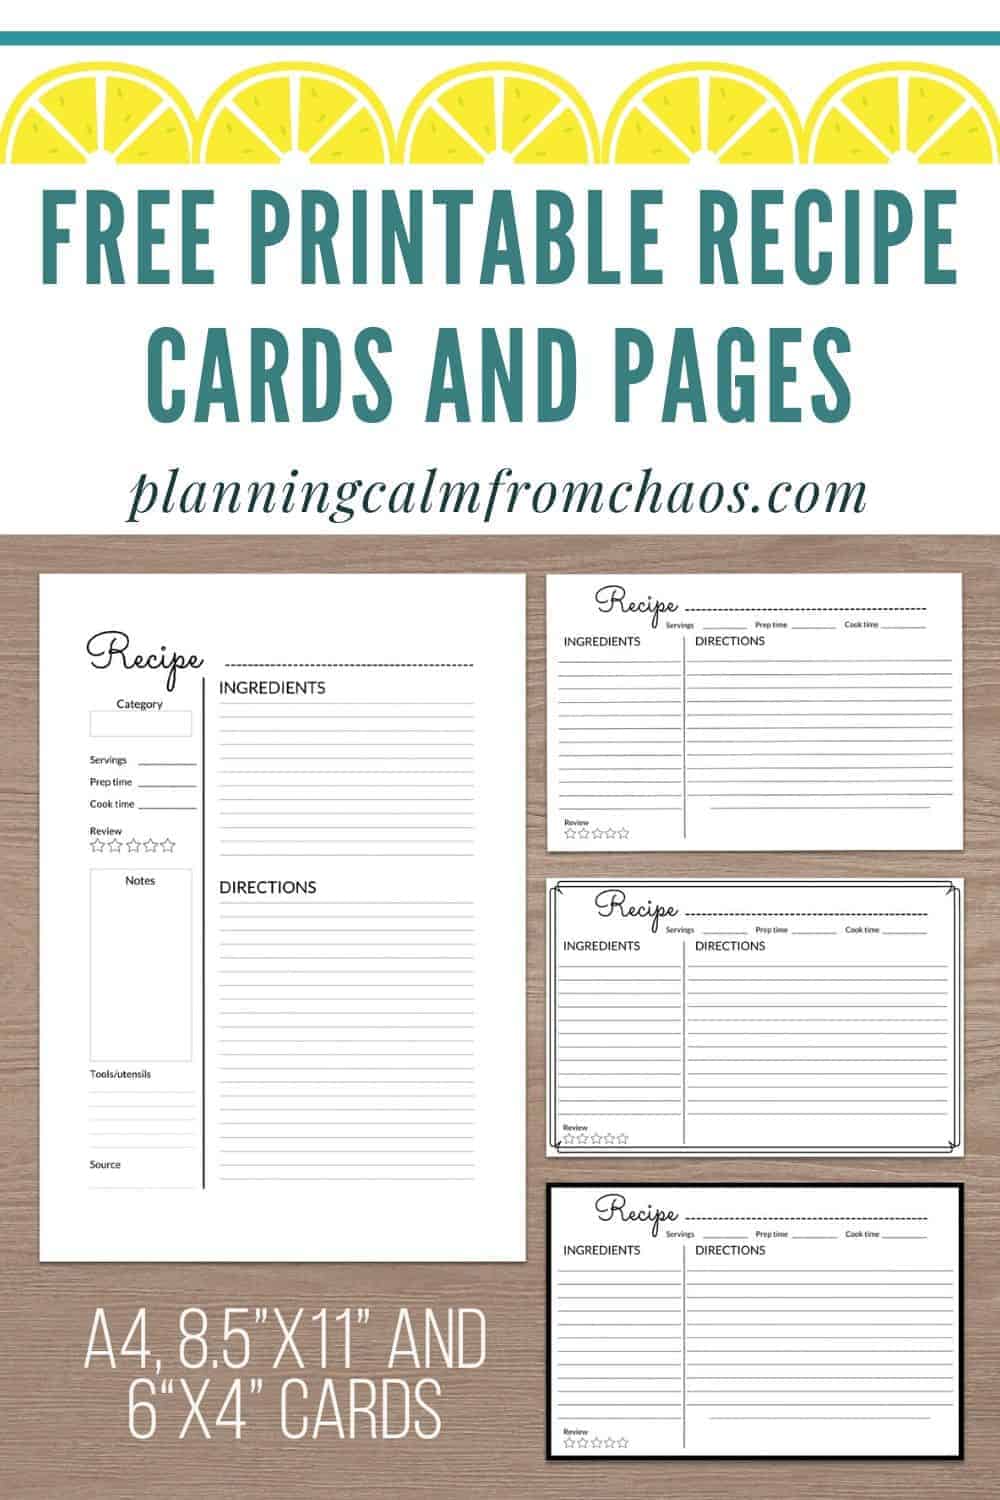 Free Printable Recipe Cards and Pages - Planning Calm From Chaos